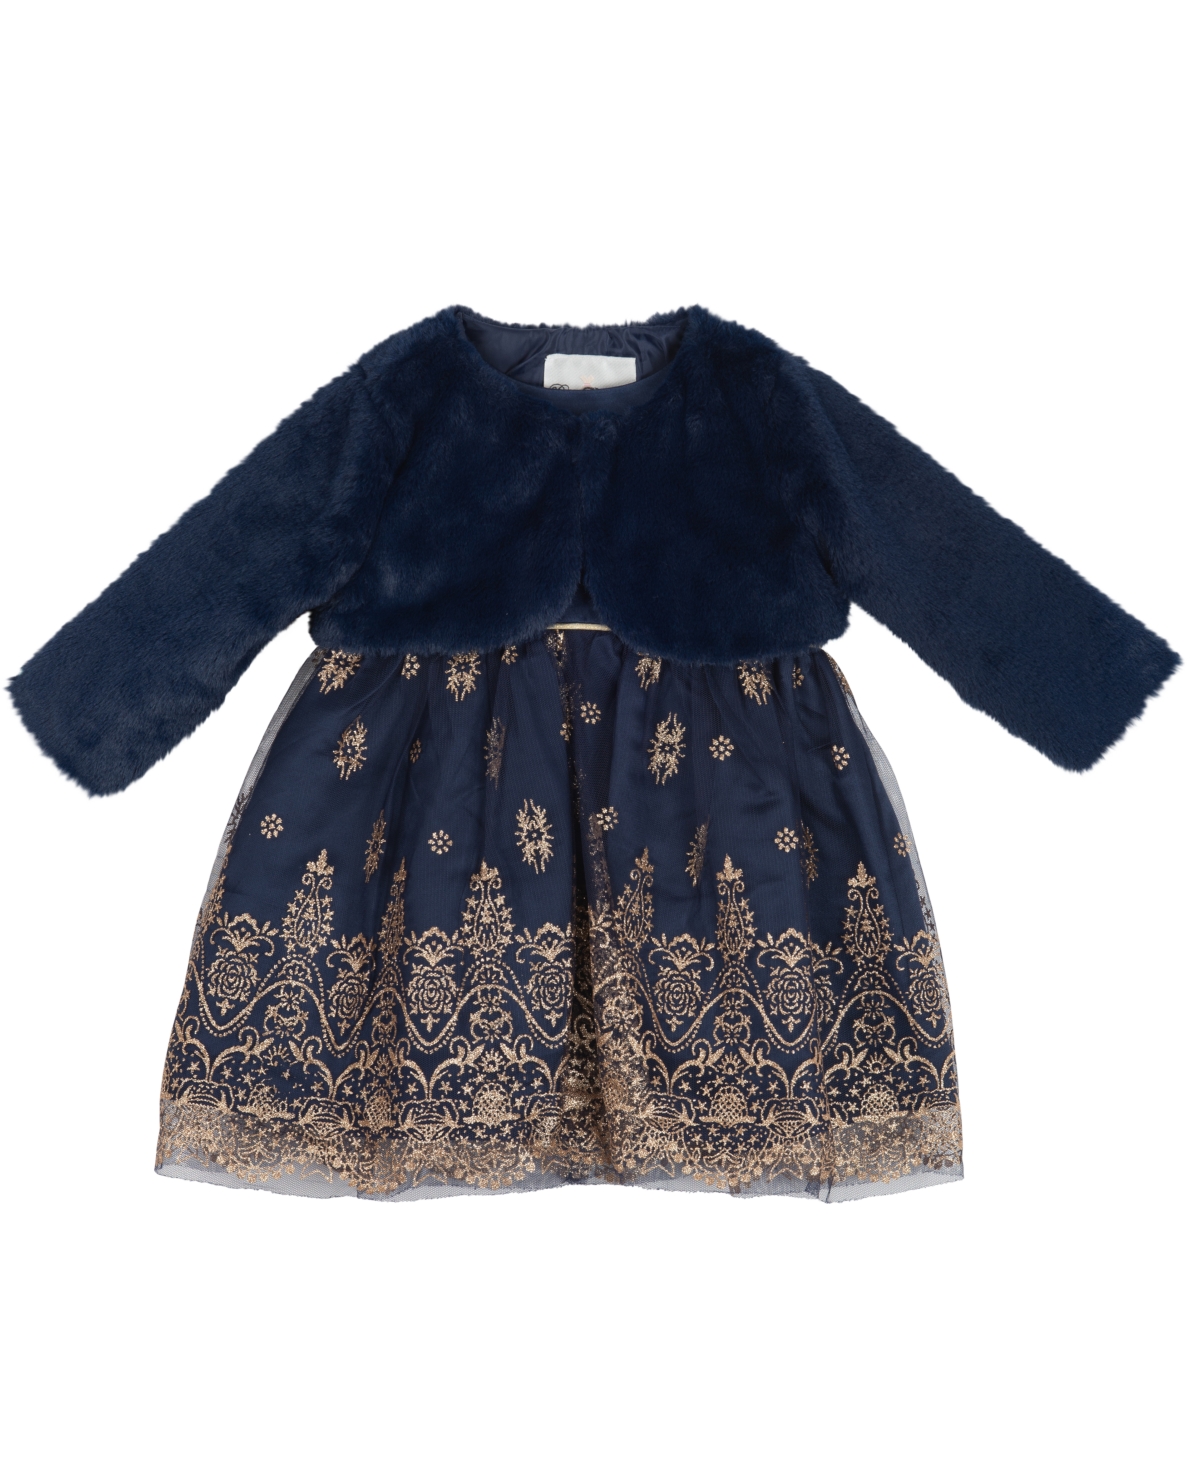 Rare Editions Baby Girls Glitter Dress And Faux Fur Jacket, 2 Piece Set In Navy